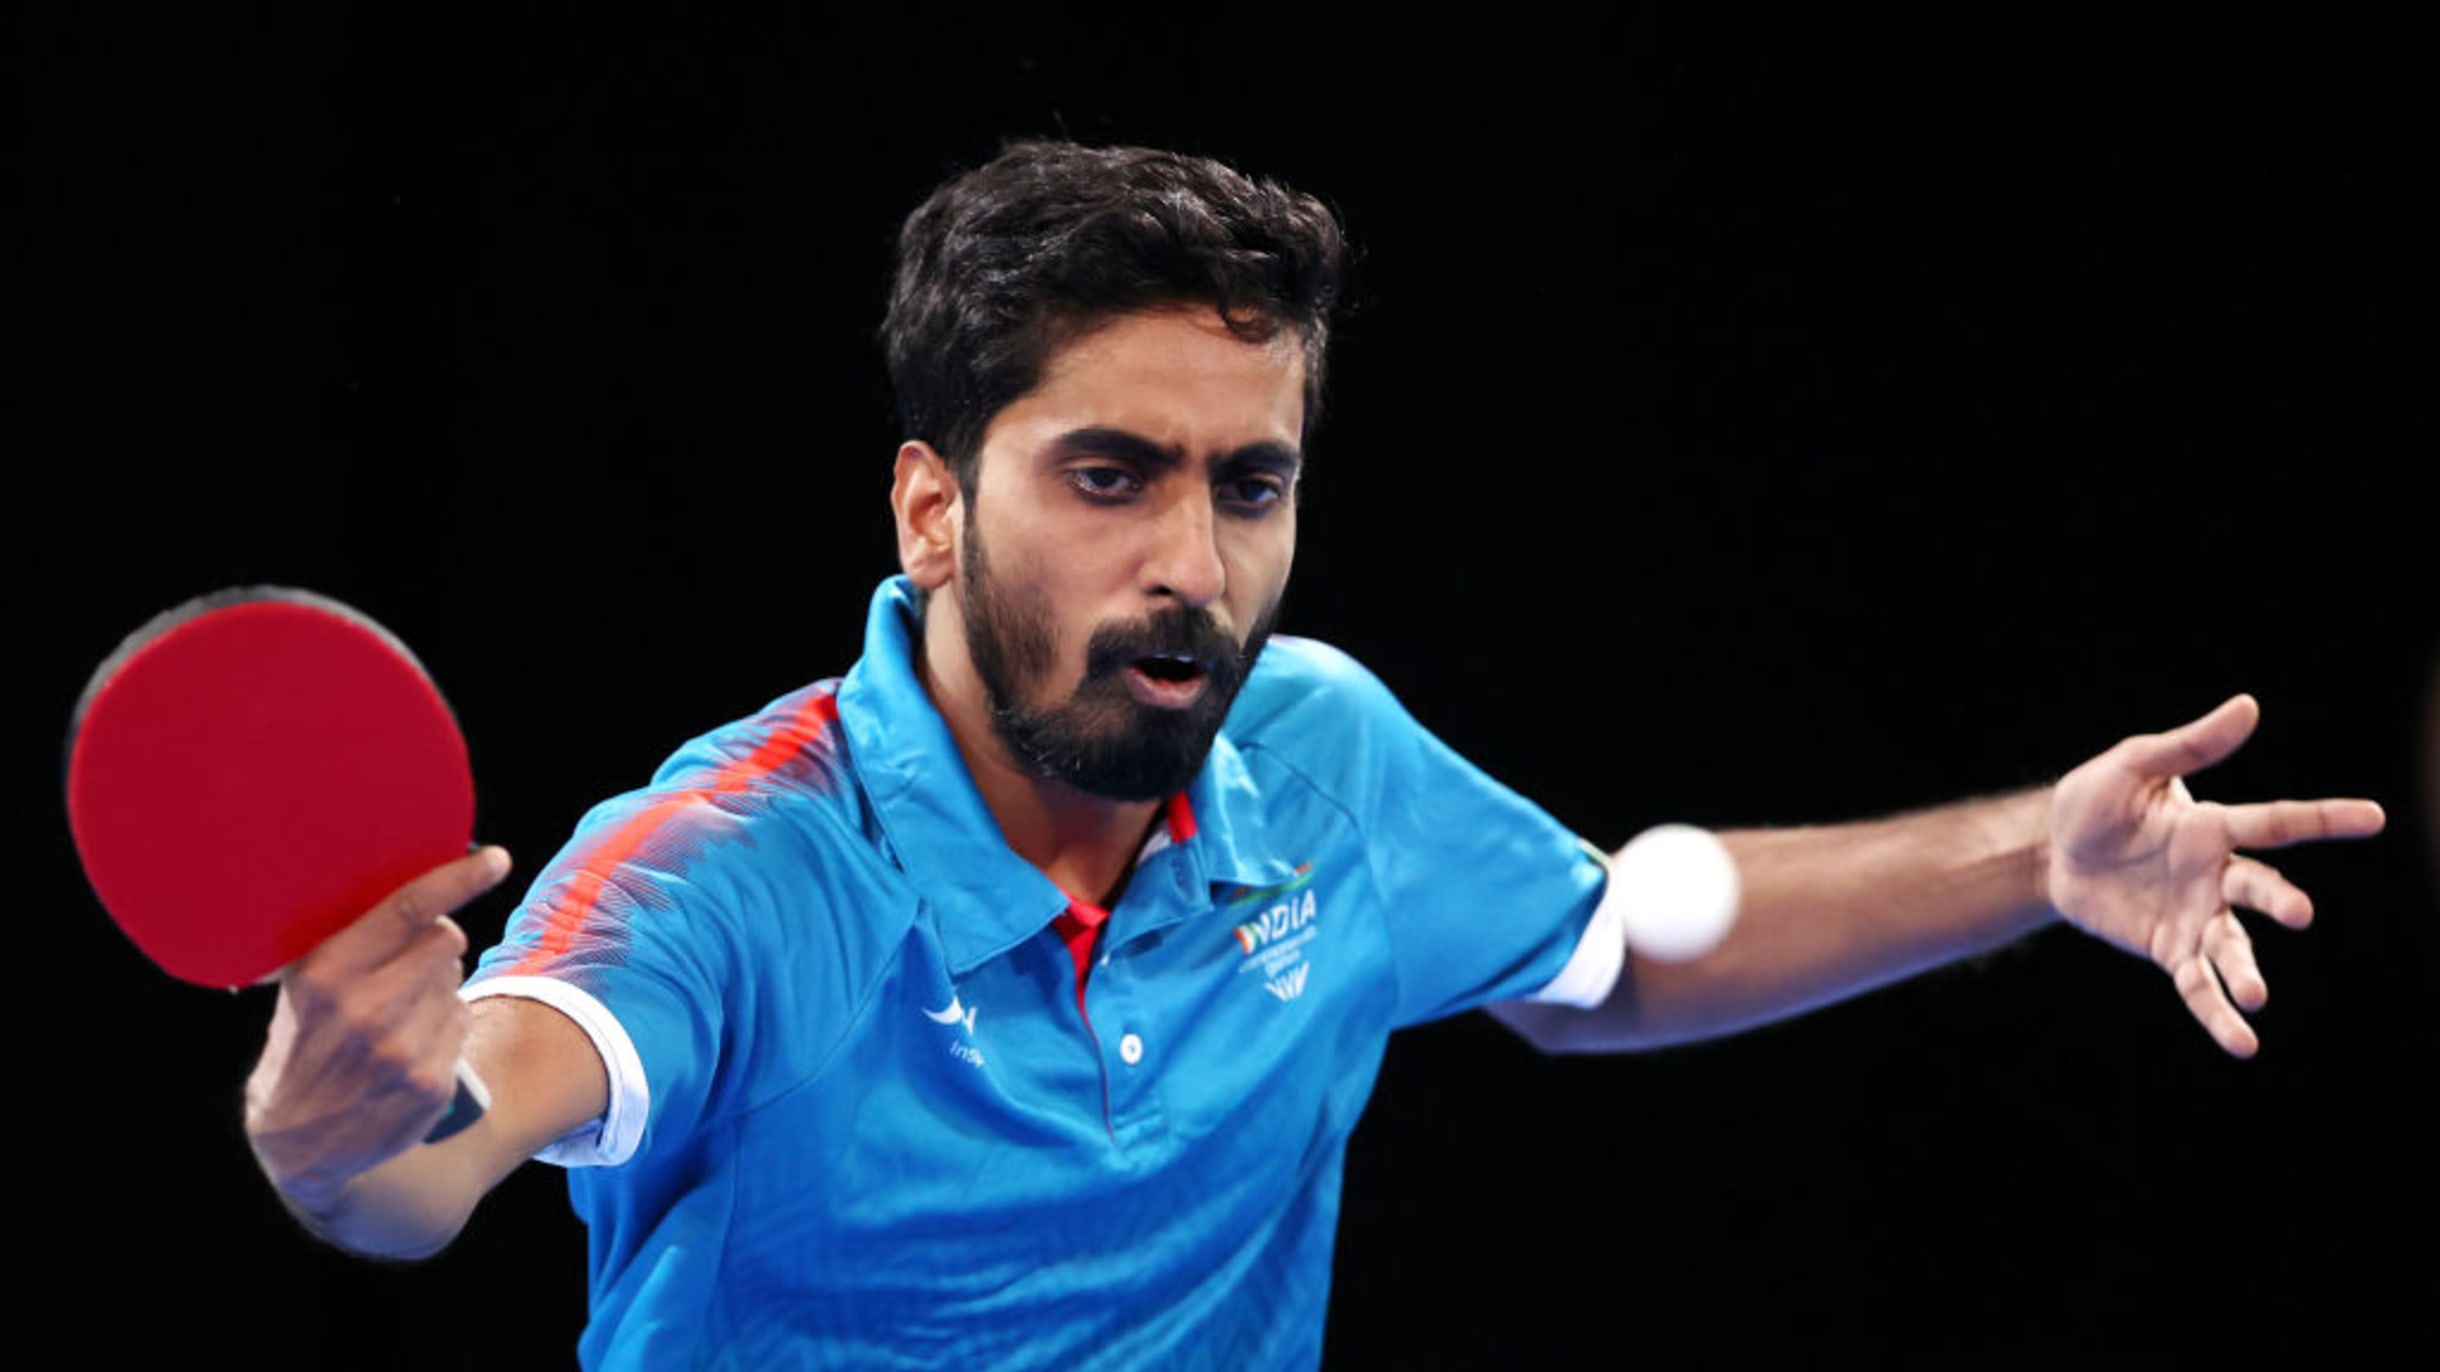 World team table tennis championships 2022 Get schedule and watch live streaming and telecast in India